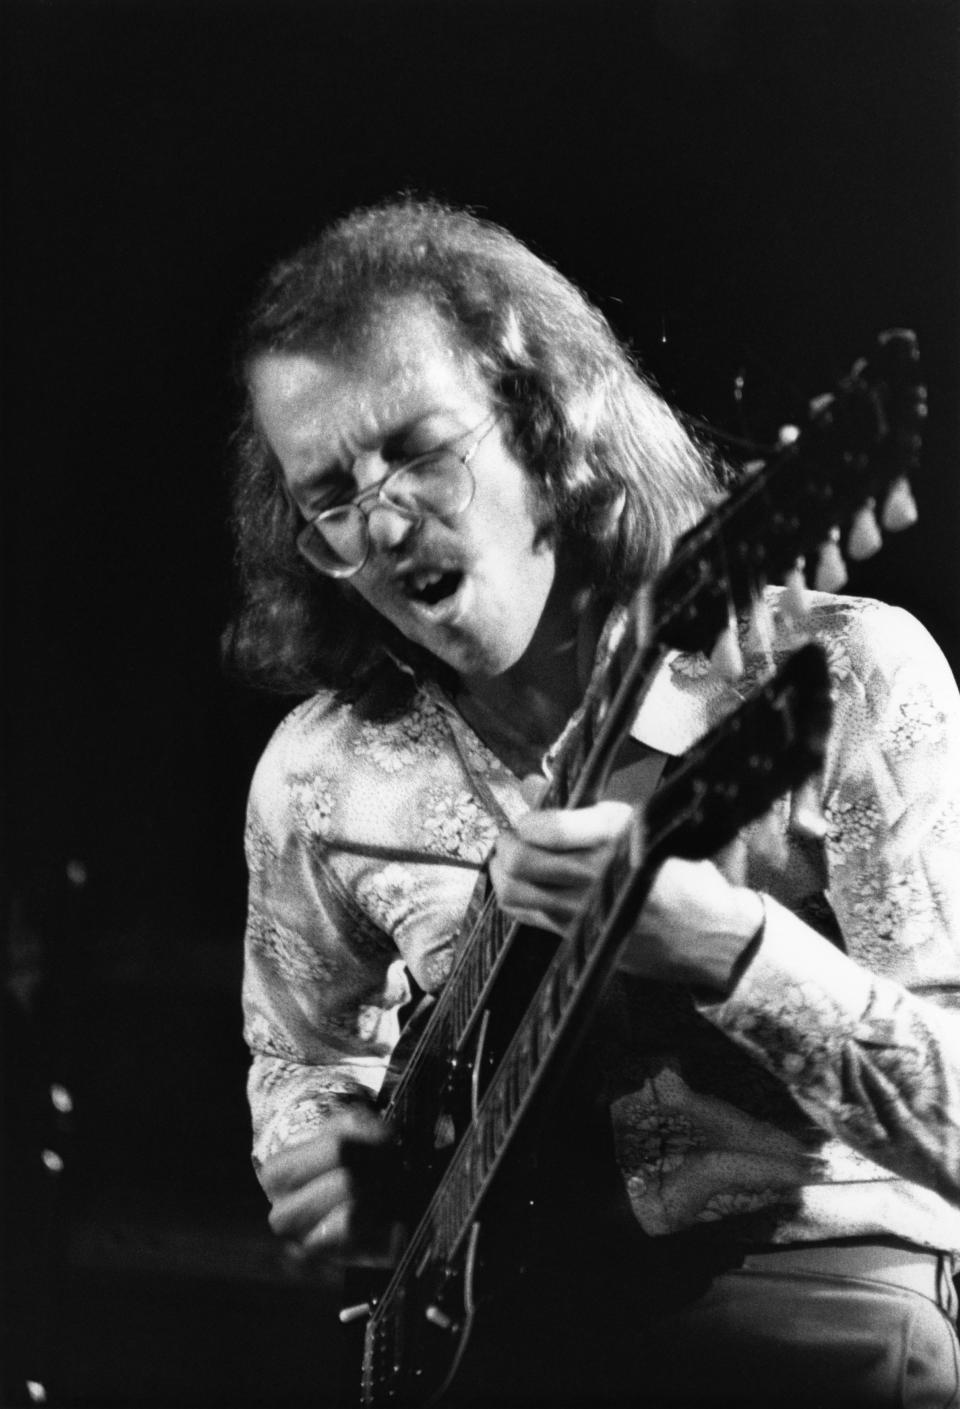 From AP: Bob Welch, a former member of Fleetwood Mac who went on to write songs and record several hits during a solo career,<a href="http://www.huffingtonpost.com/2012/06/07/bob-welch-dead-fleetwood-mac-gunshot_n_1579166.html"> died June 7, 2012</a>, of a self-inflicted gunshot wound, police said. He was 65.